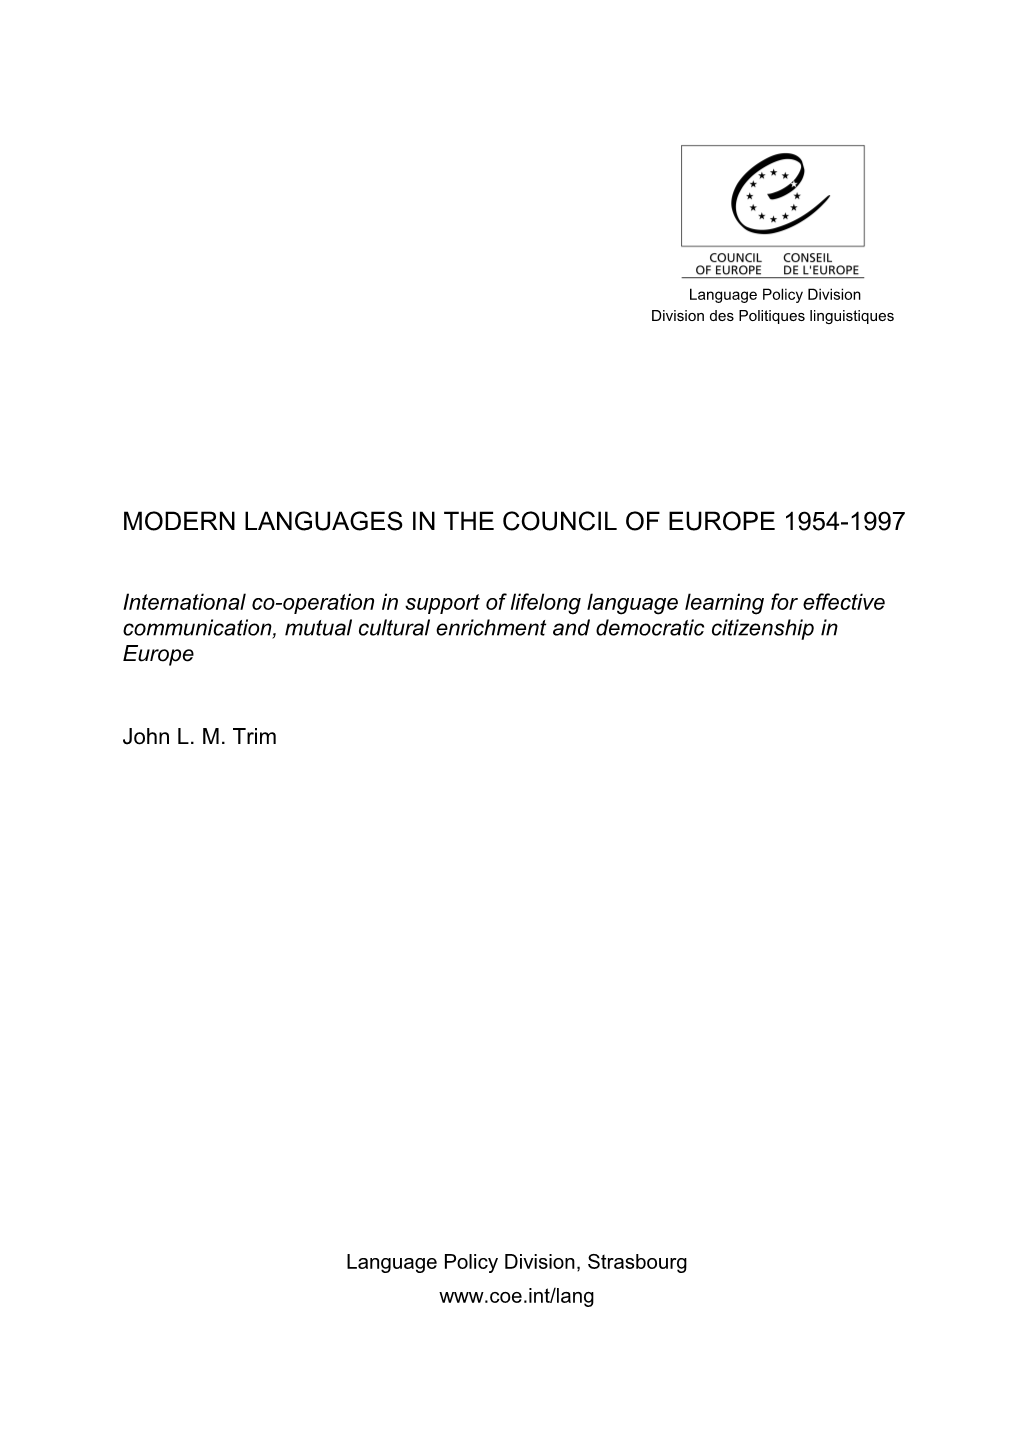 Modern Languages in the Council of Europe 1954-1997